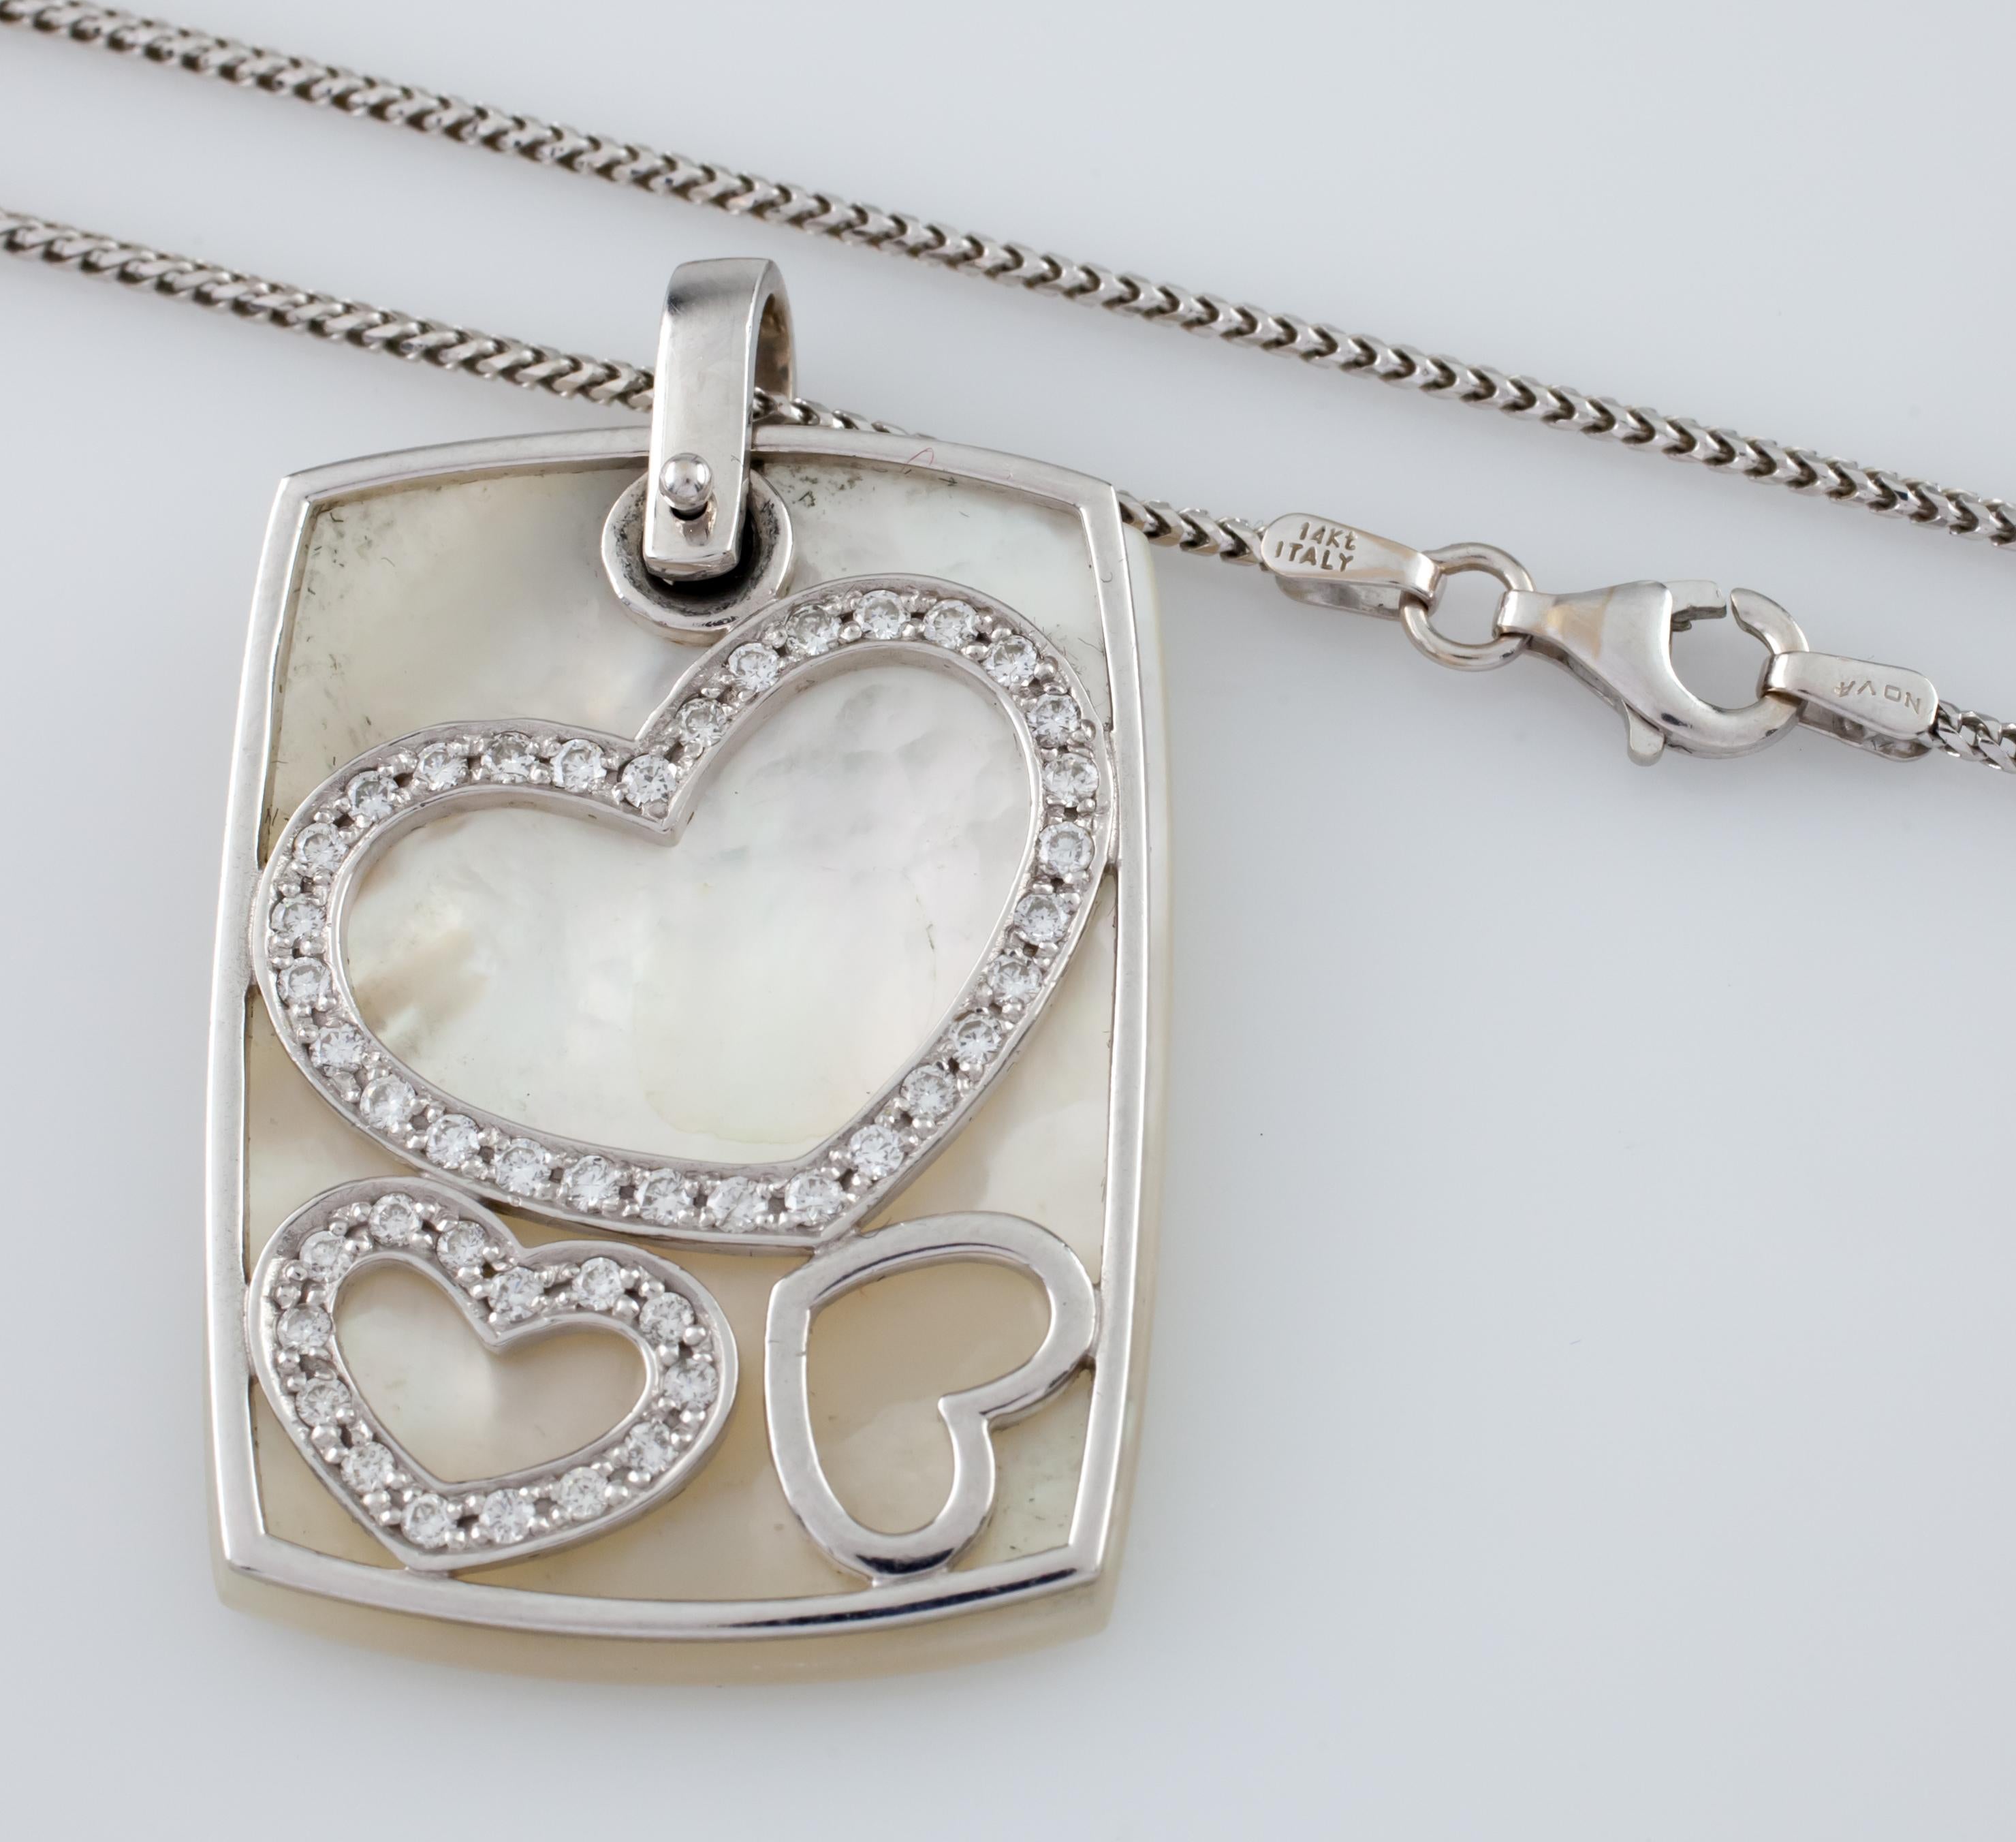 Gorgeous and Unique Mother-of-Pearl, 14k White Gold, and Diamond Pendant
14k White Gold Wire Frame Features Heart Outlines with Pave Diamonds
Mother-of-Pearl Pendant Articulates From Frame but Serves as Background
Total Diamond Weight = 0.75